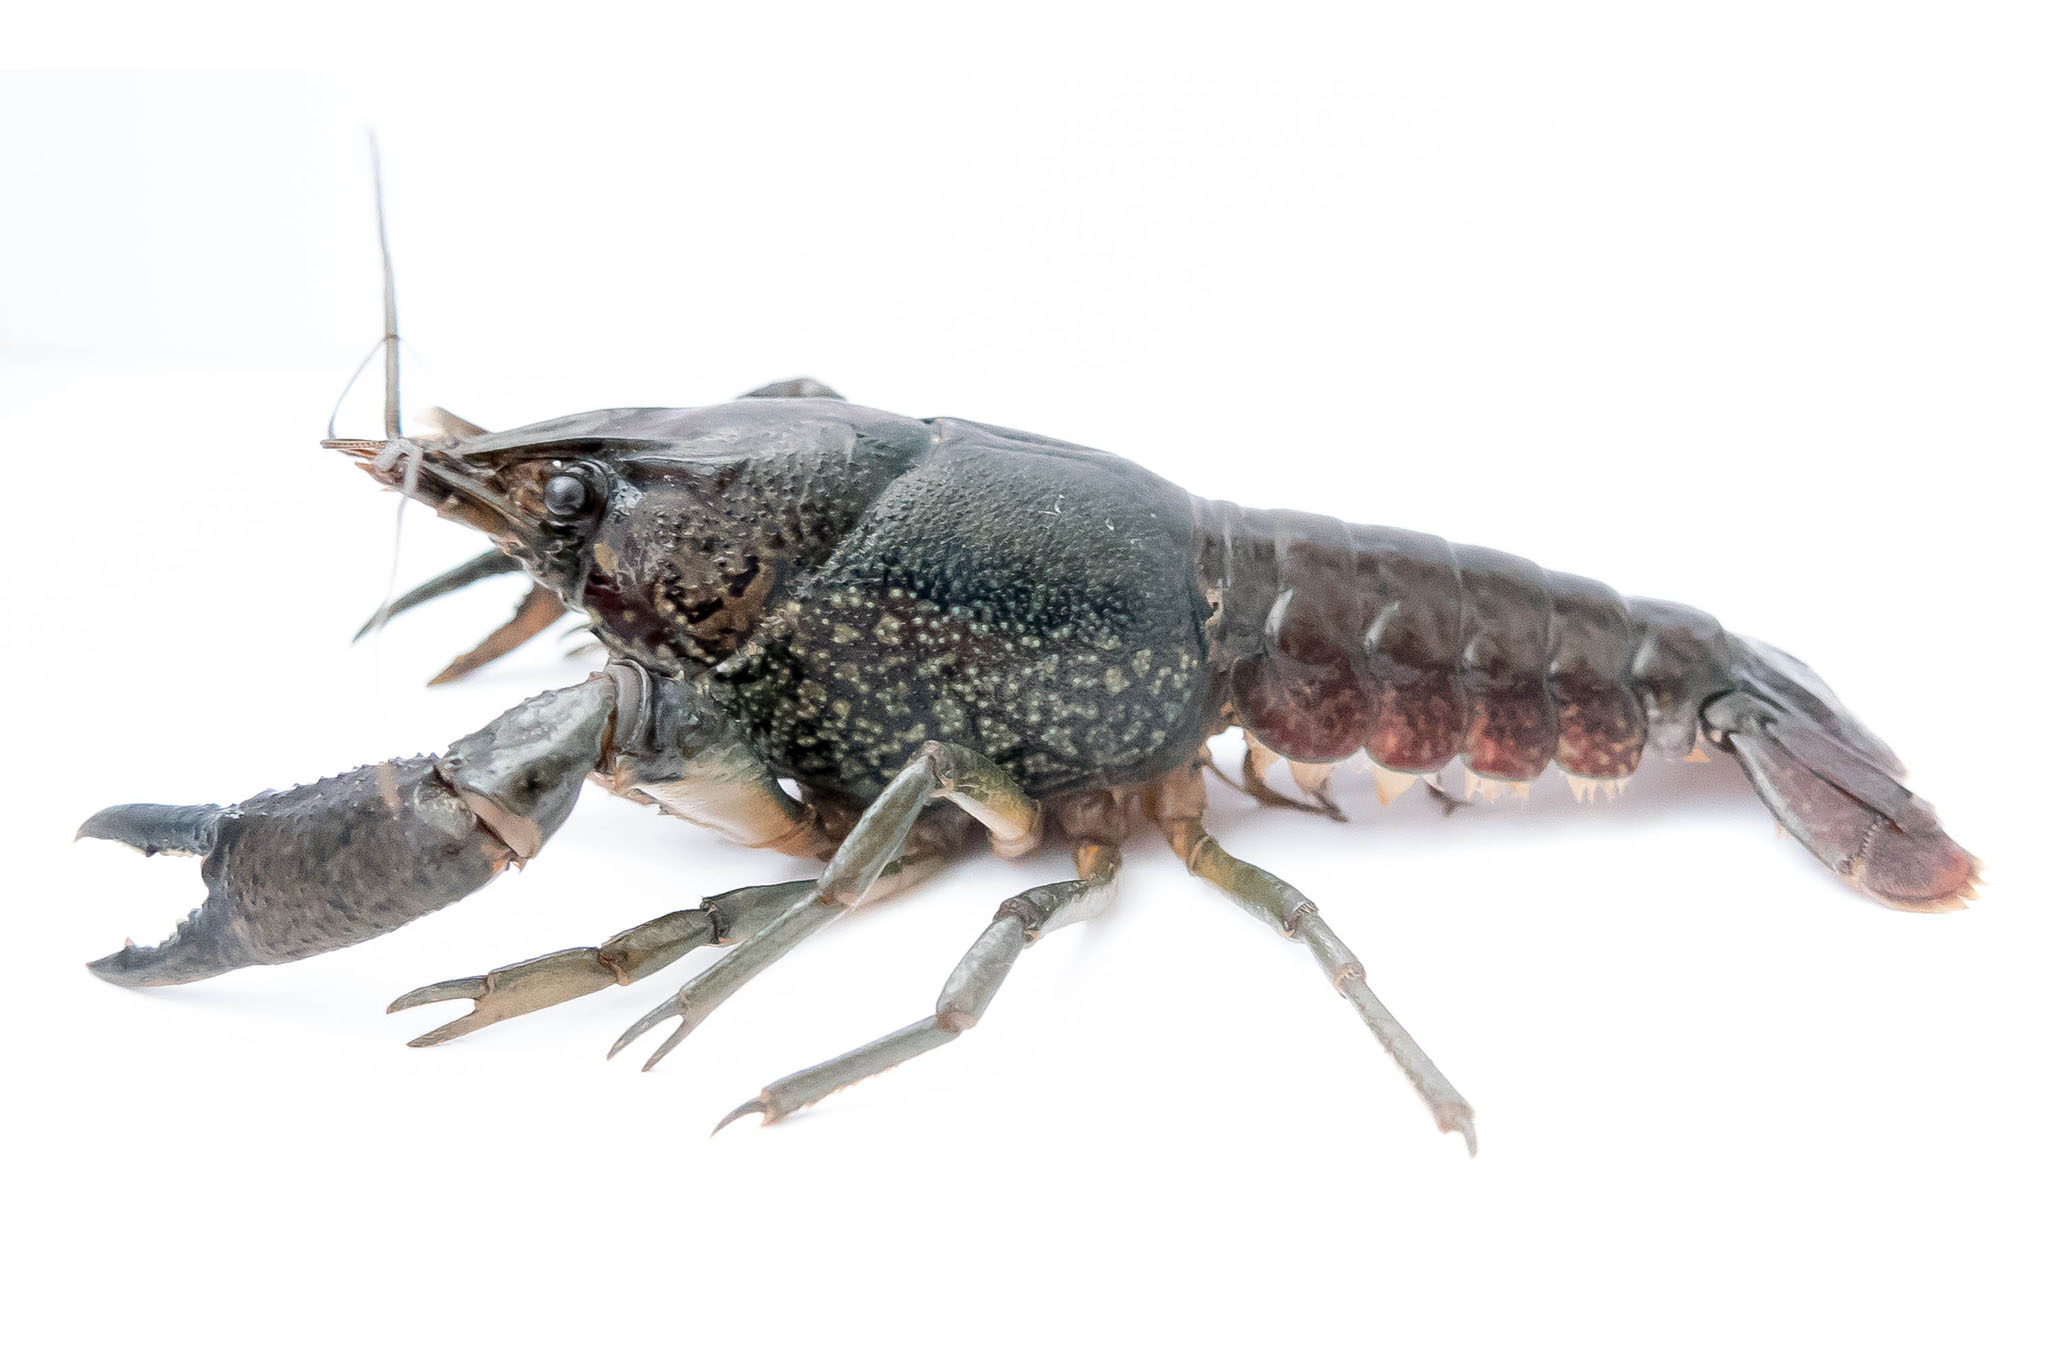 Scientists Use Marbled Crayfish to Study Tumor Evolution